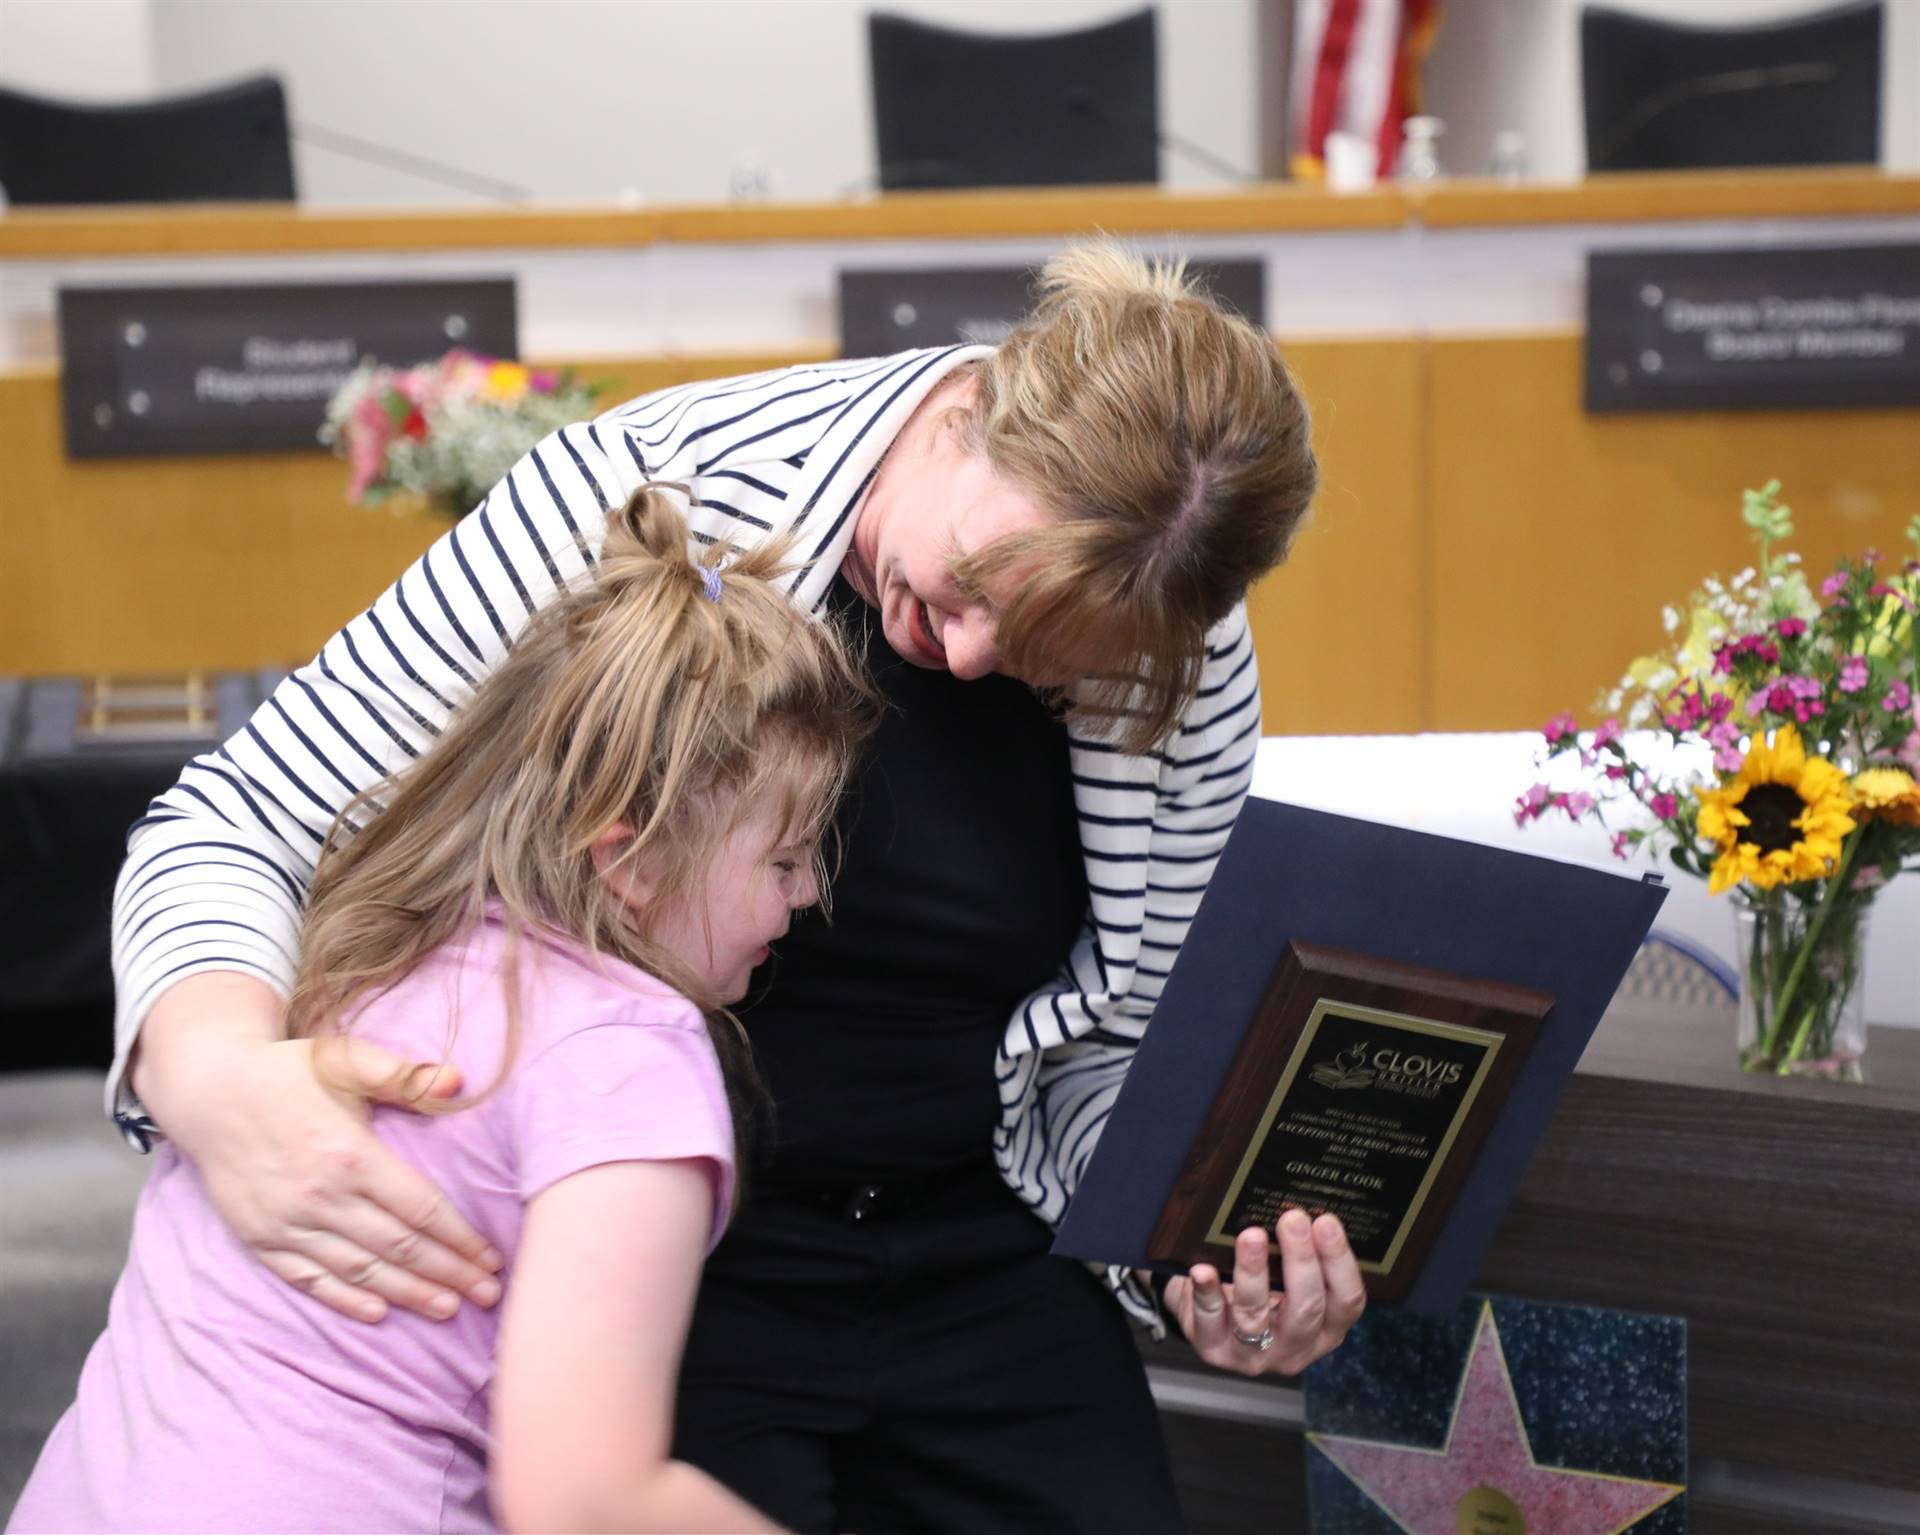 Ginger Cook hugging a young girl after receiving her award